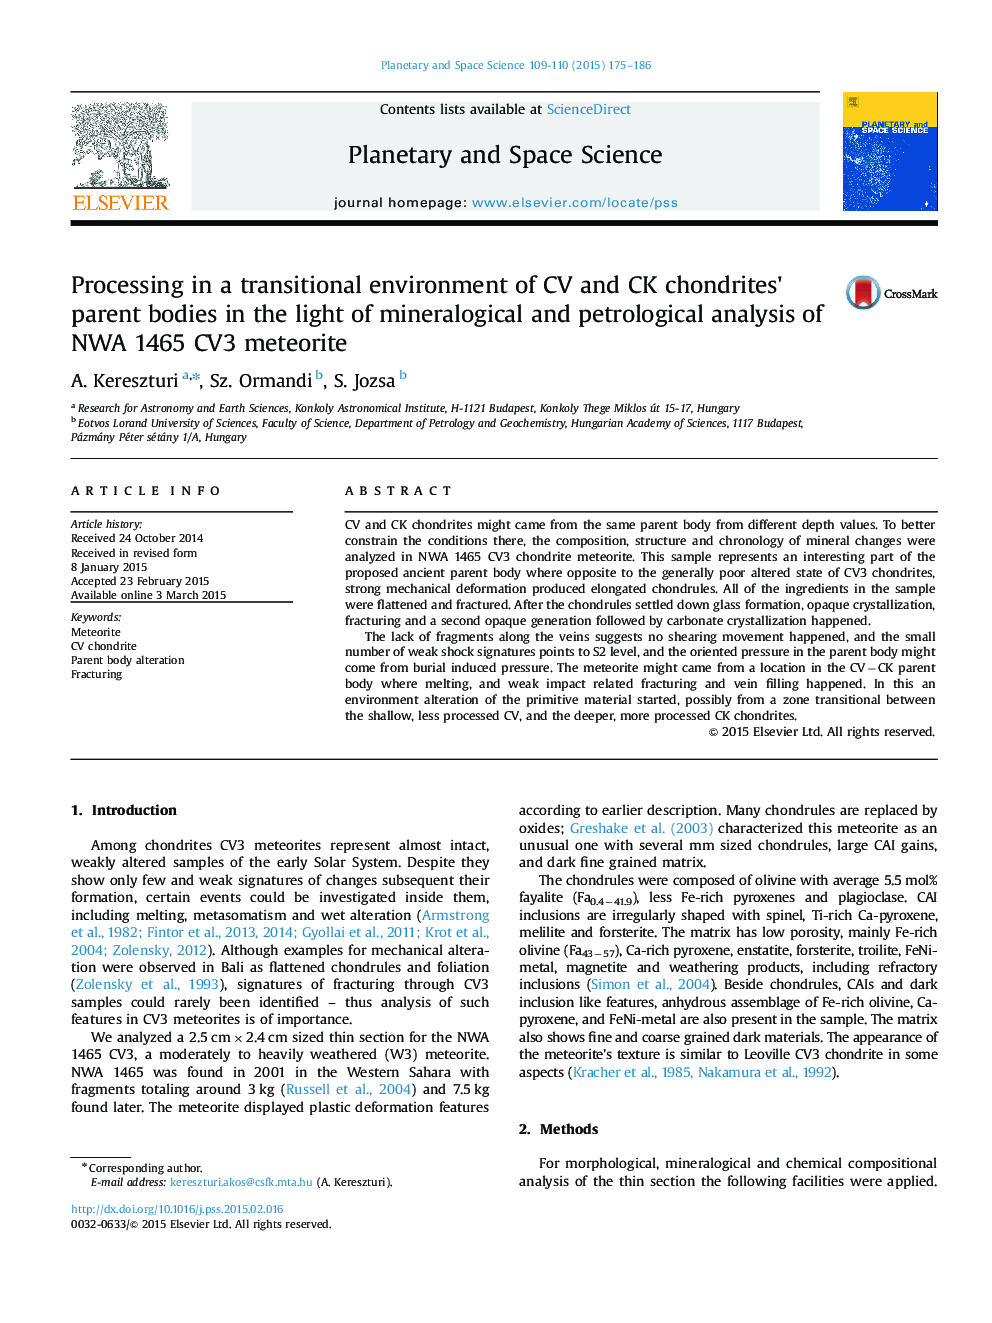 Processing in a transitional environment of CV and CK chondrites×³ parent bodies in the light of mineralogical and petrological analysis of NWA 1465 CV3 meteorite